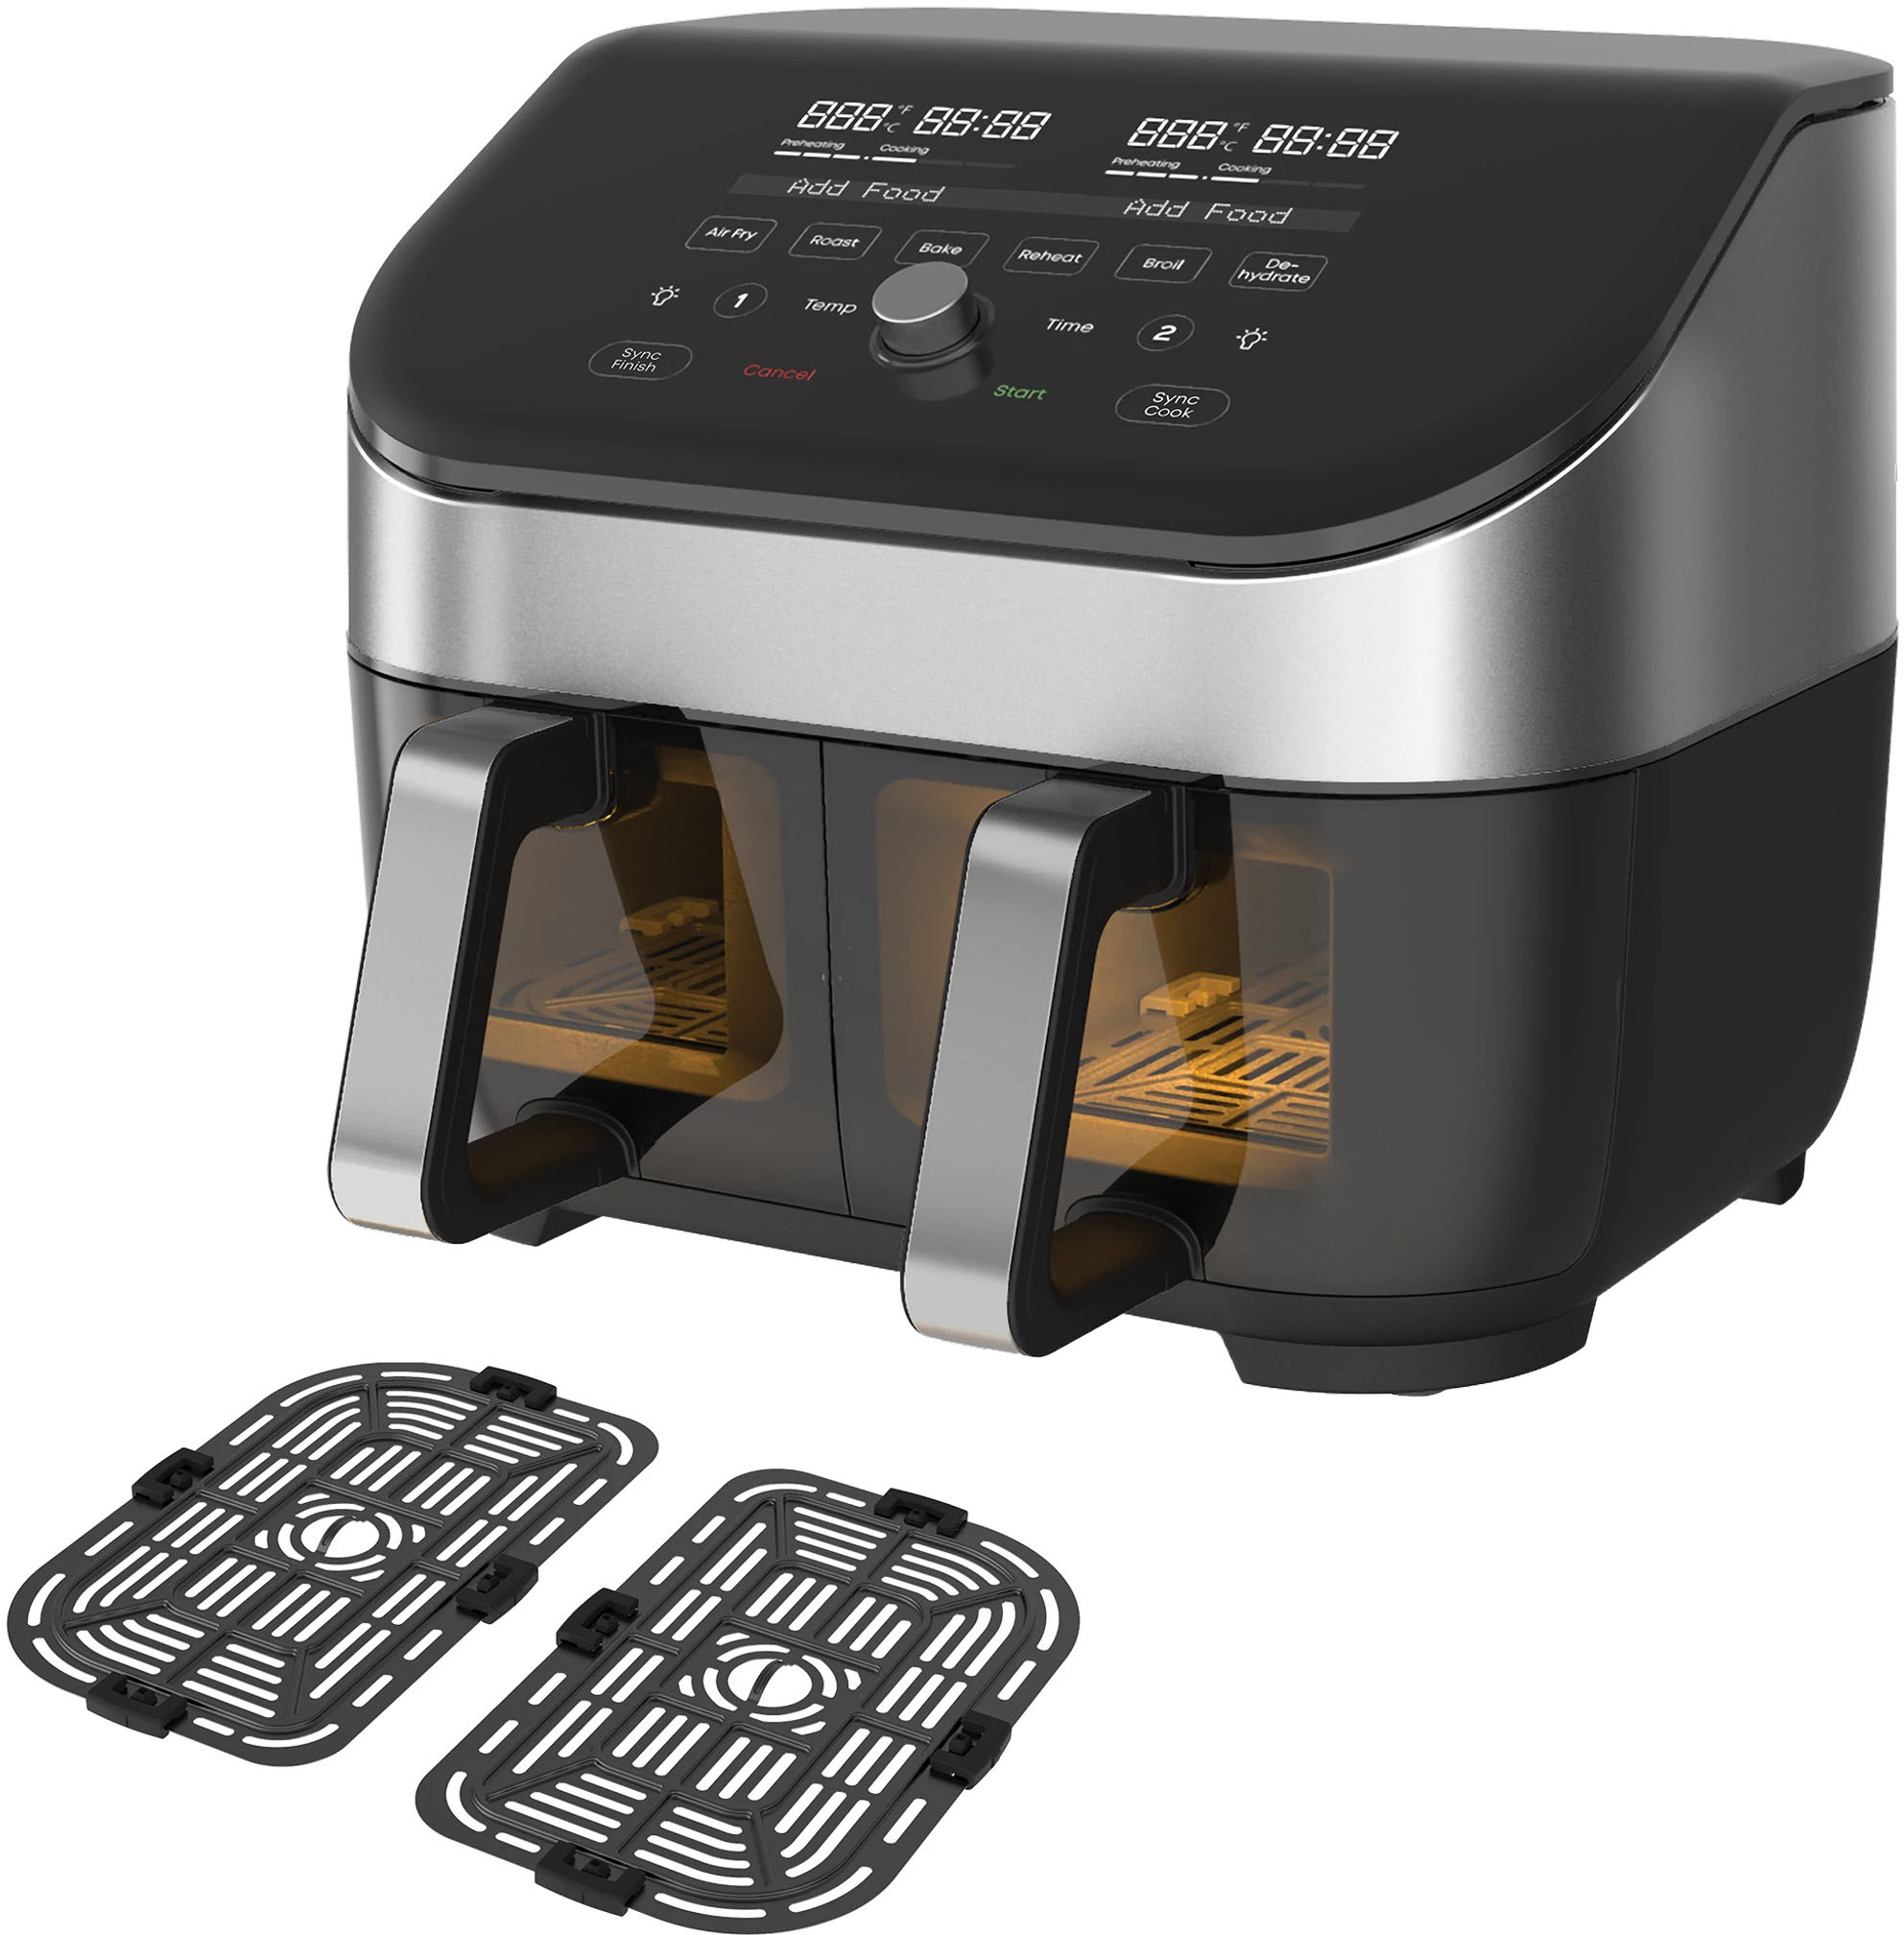  Instant Vortex Plus XL 8-quart Dual Basket Air Fryer Oven, From  the Makers of Instant Pot, 2 Independent Frying Baskets, ClearCook Windows,  Dishwasher-Safe Baskets, App with over 100 Recipes,Black : Home